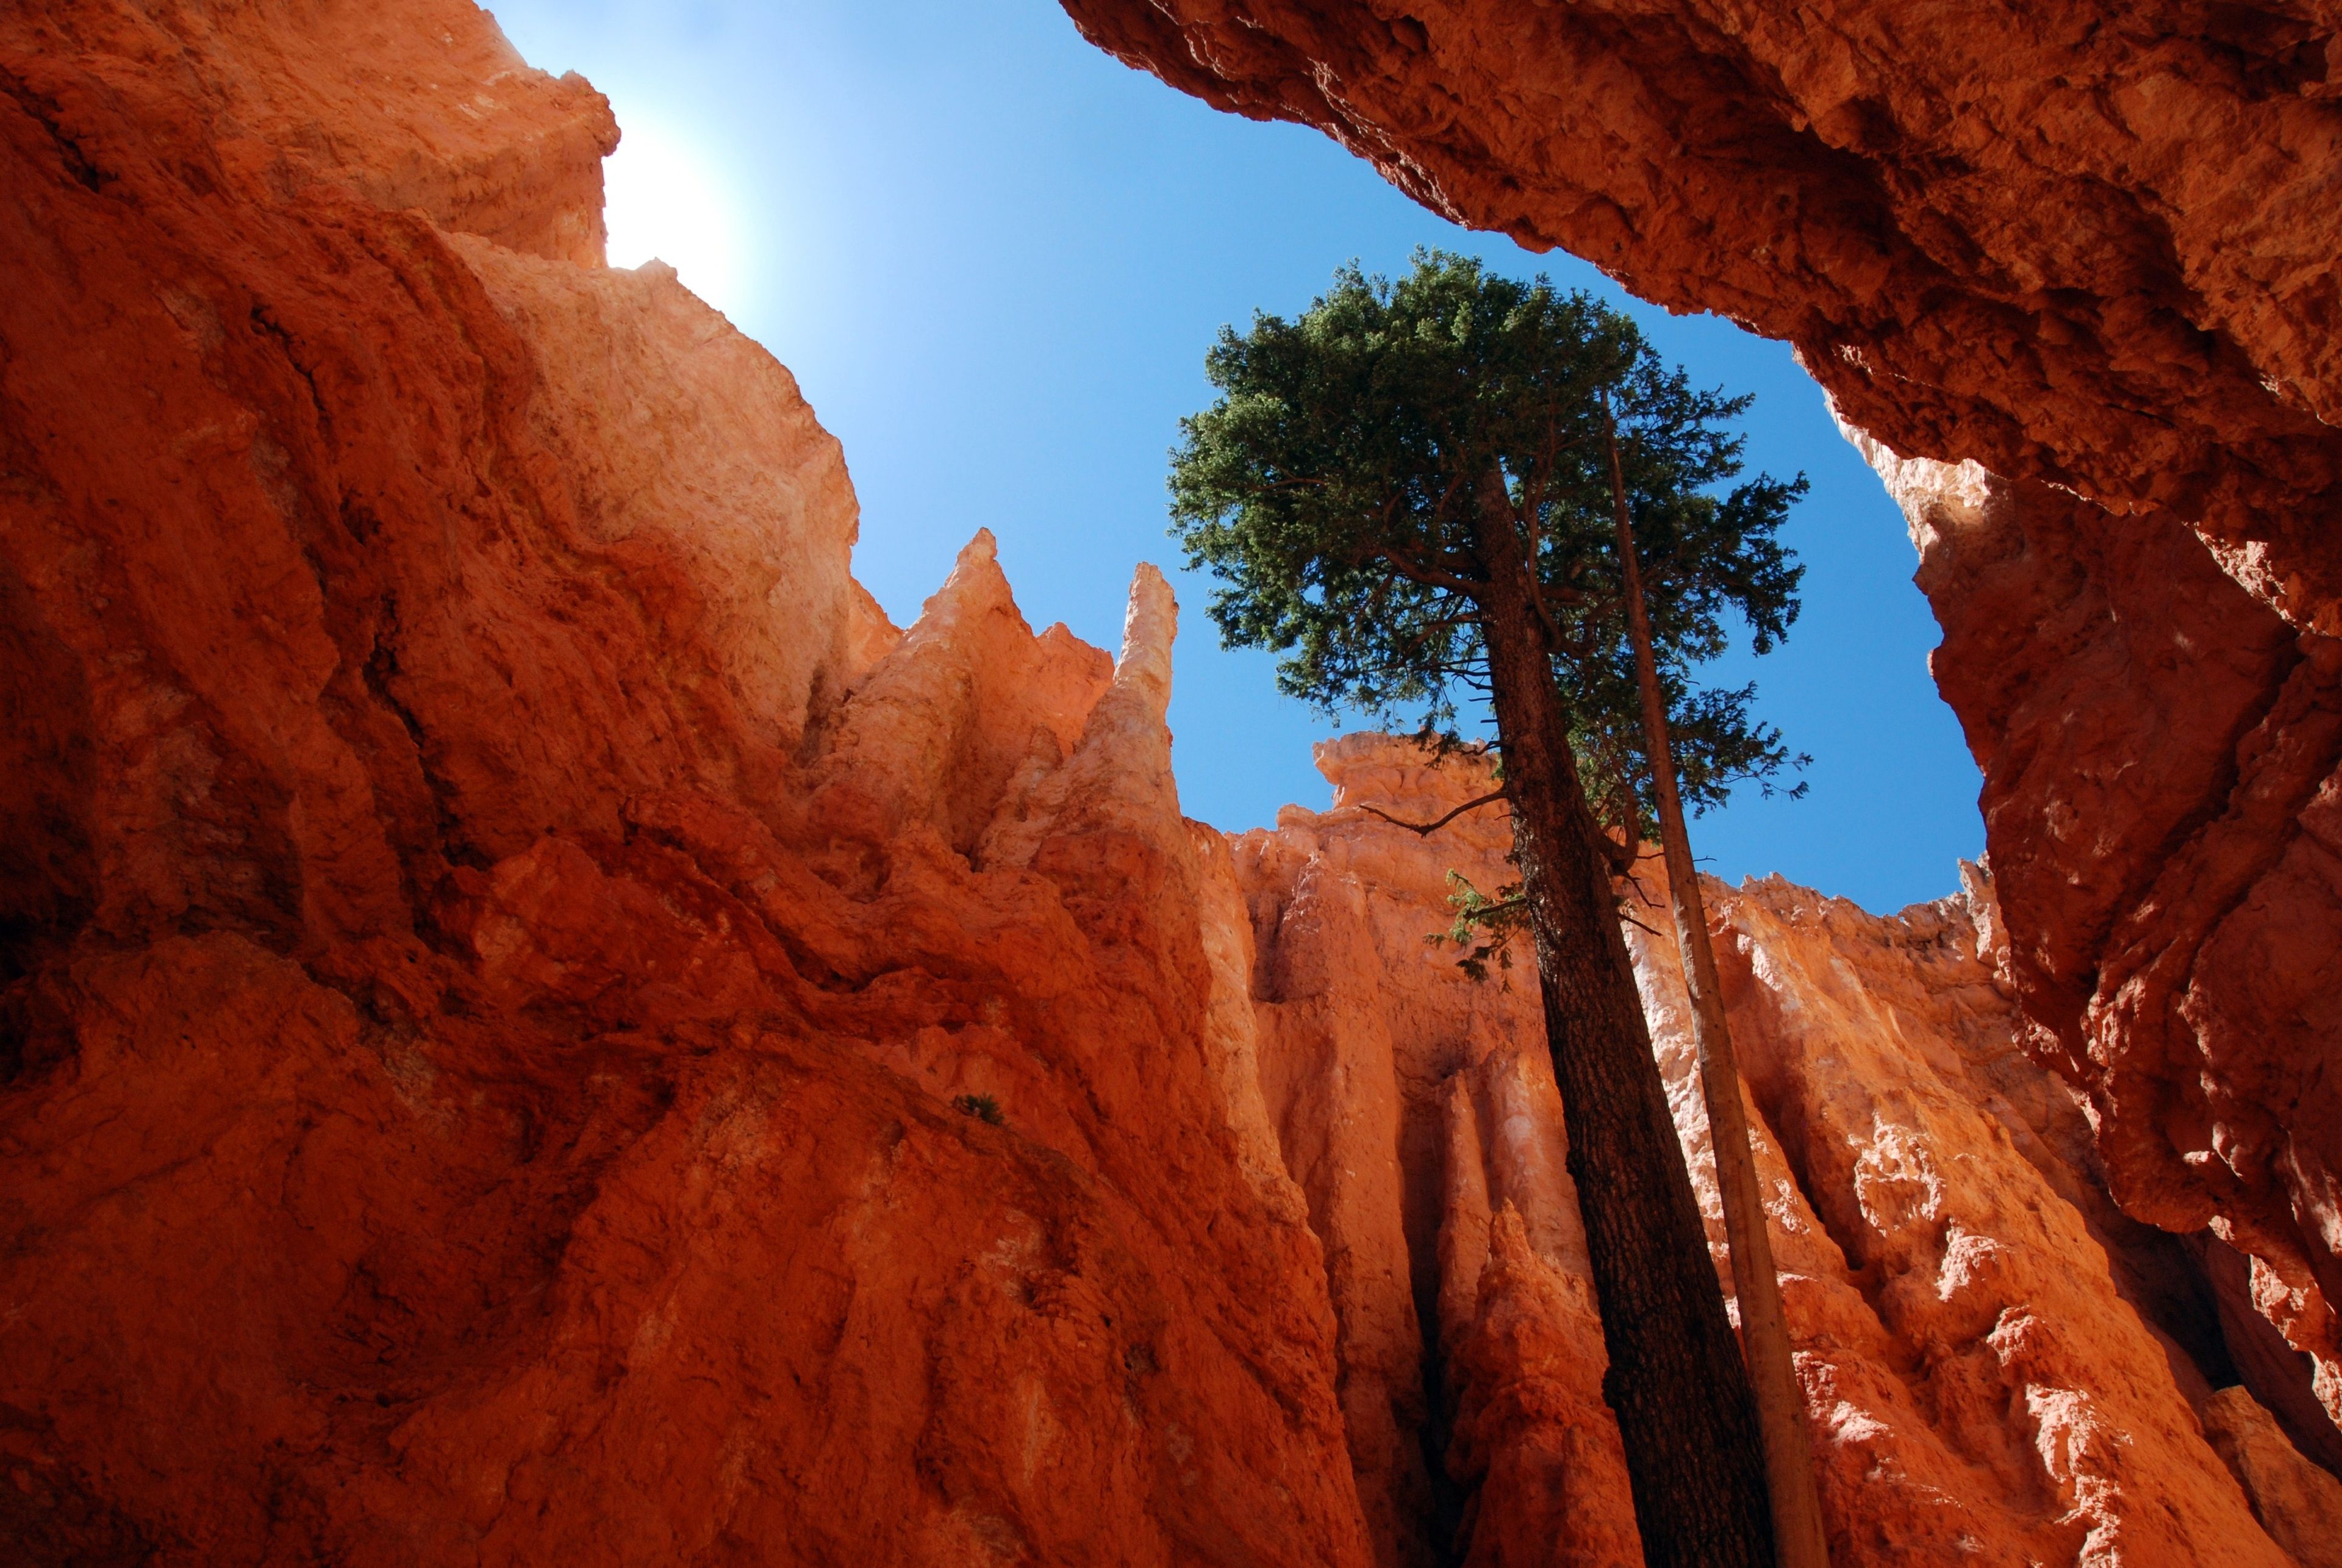 A view up to a tree inside Bryce Canyon.